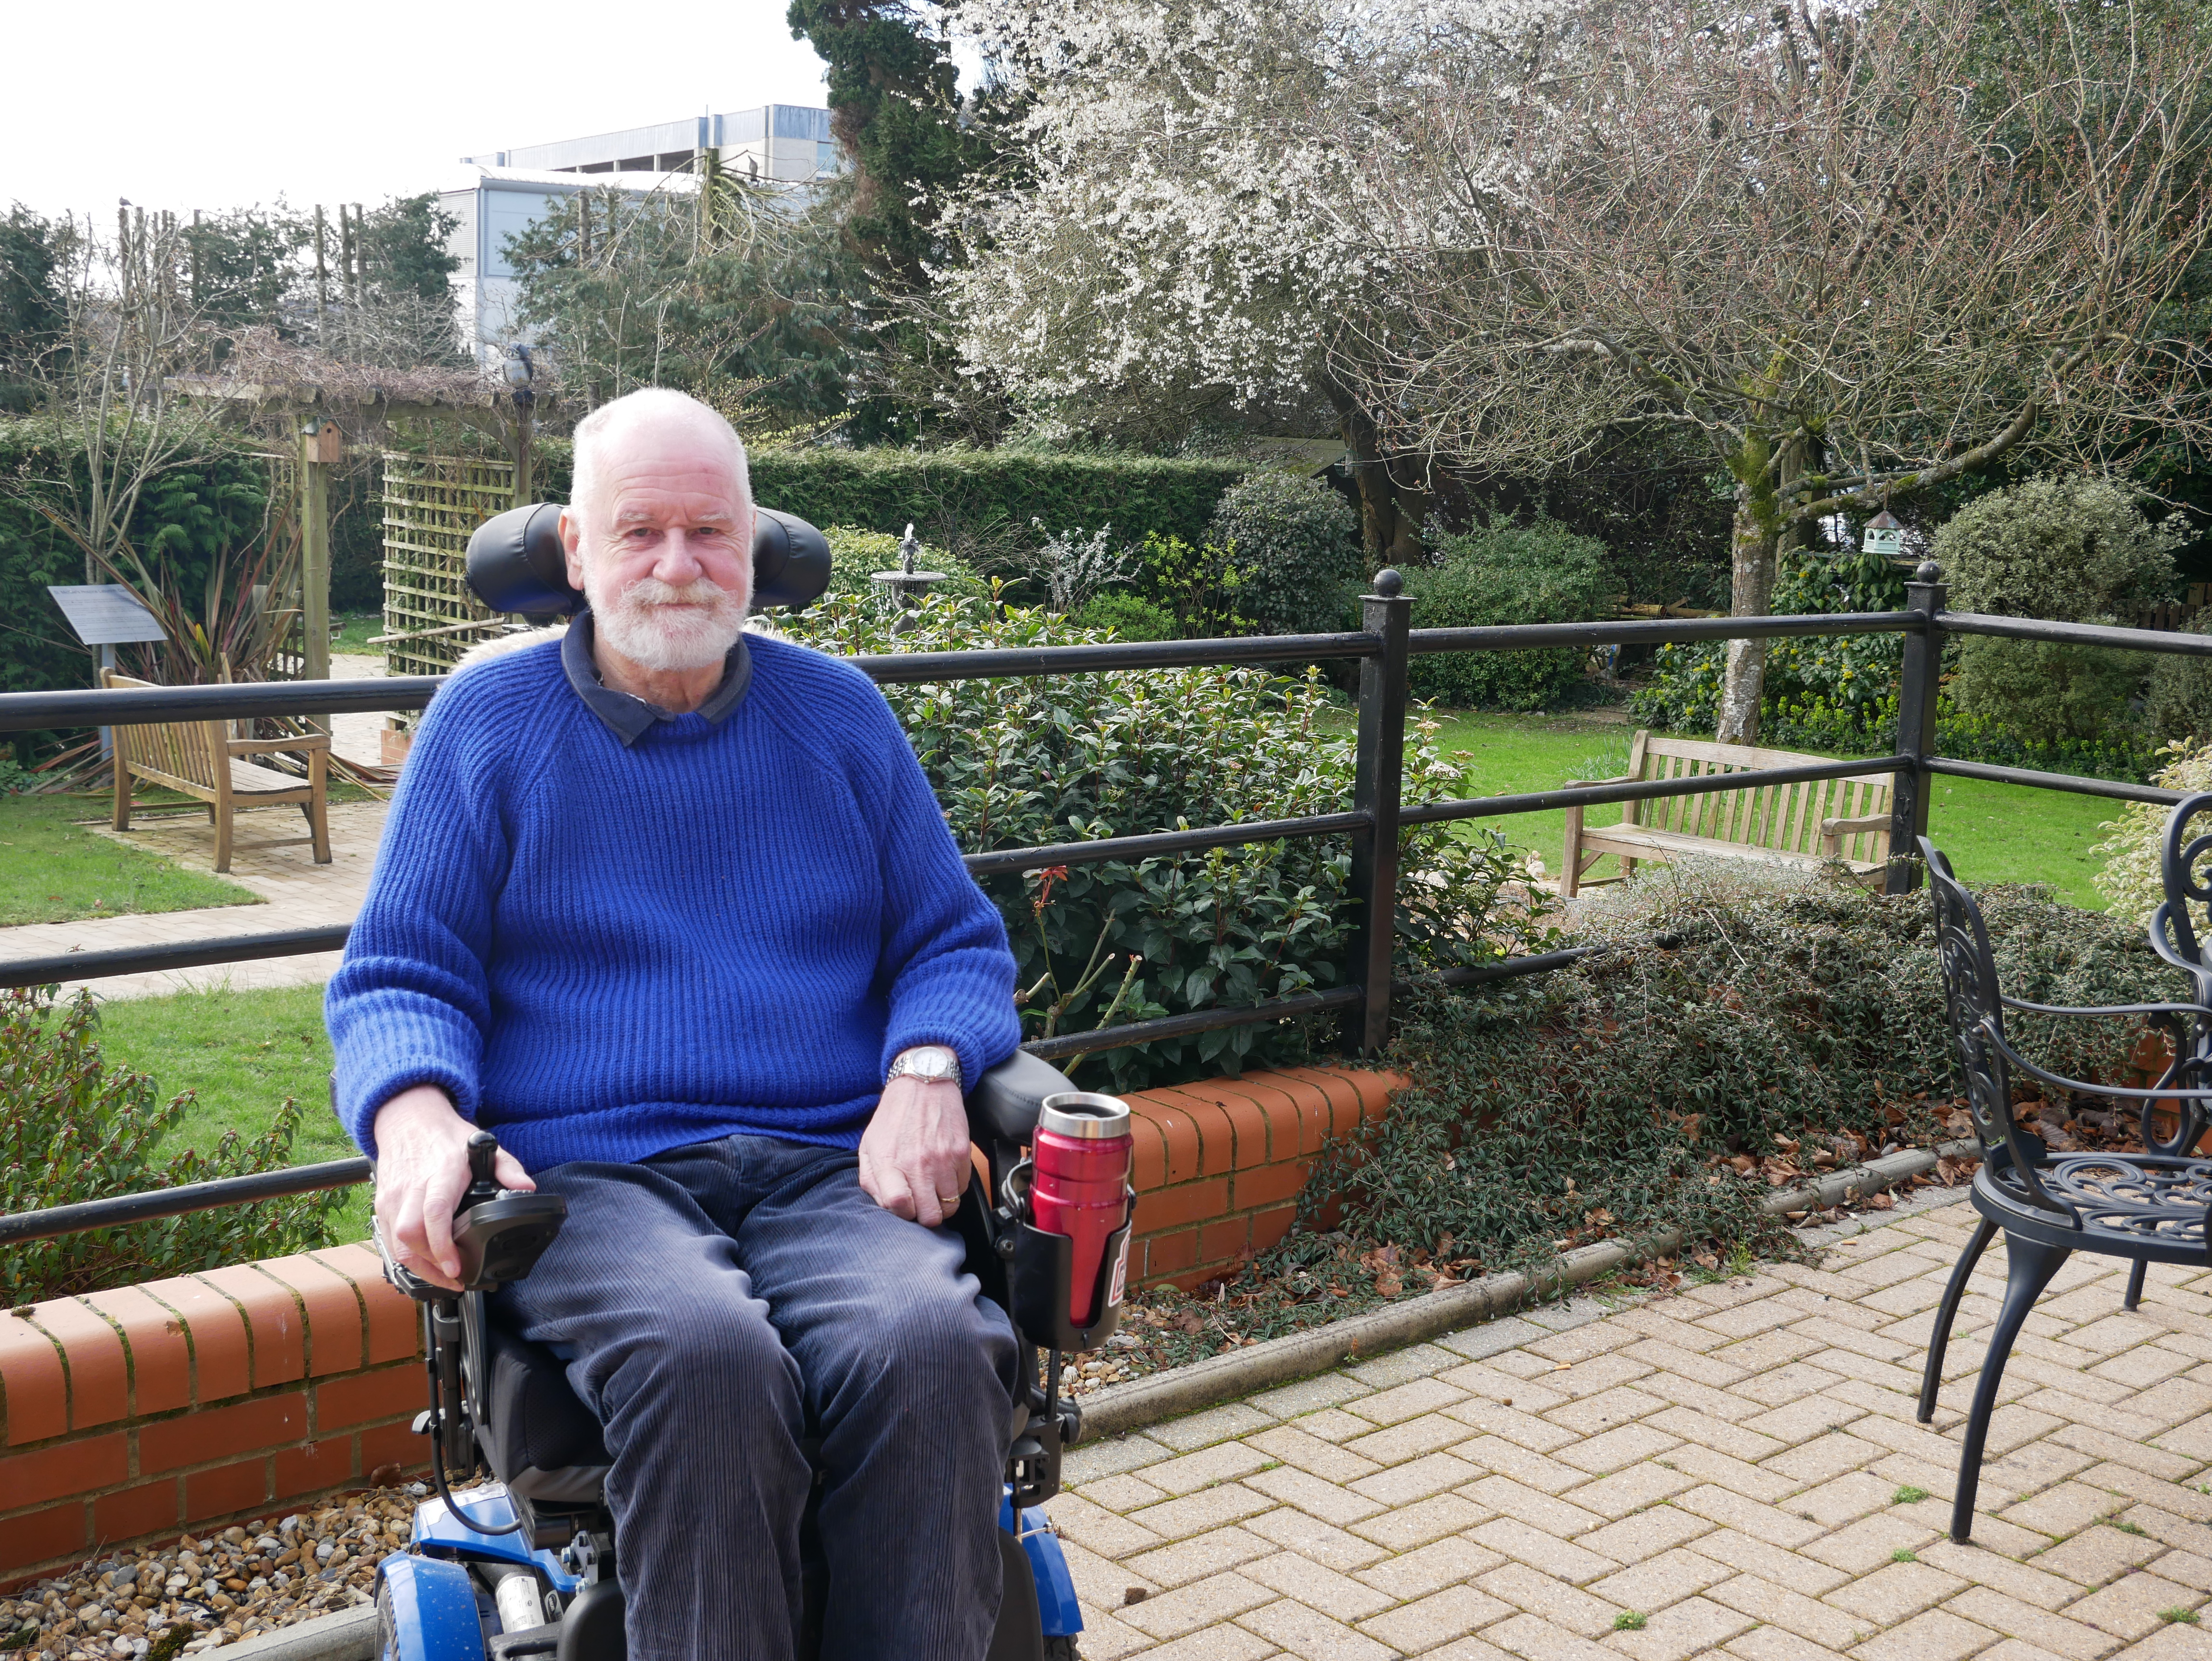 Simon smiling the camera. The Hospice gardens are behind him.